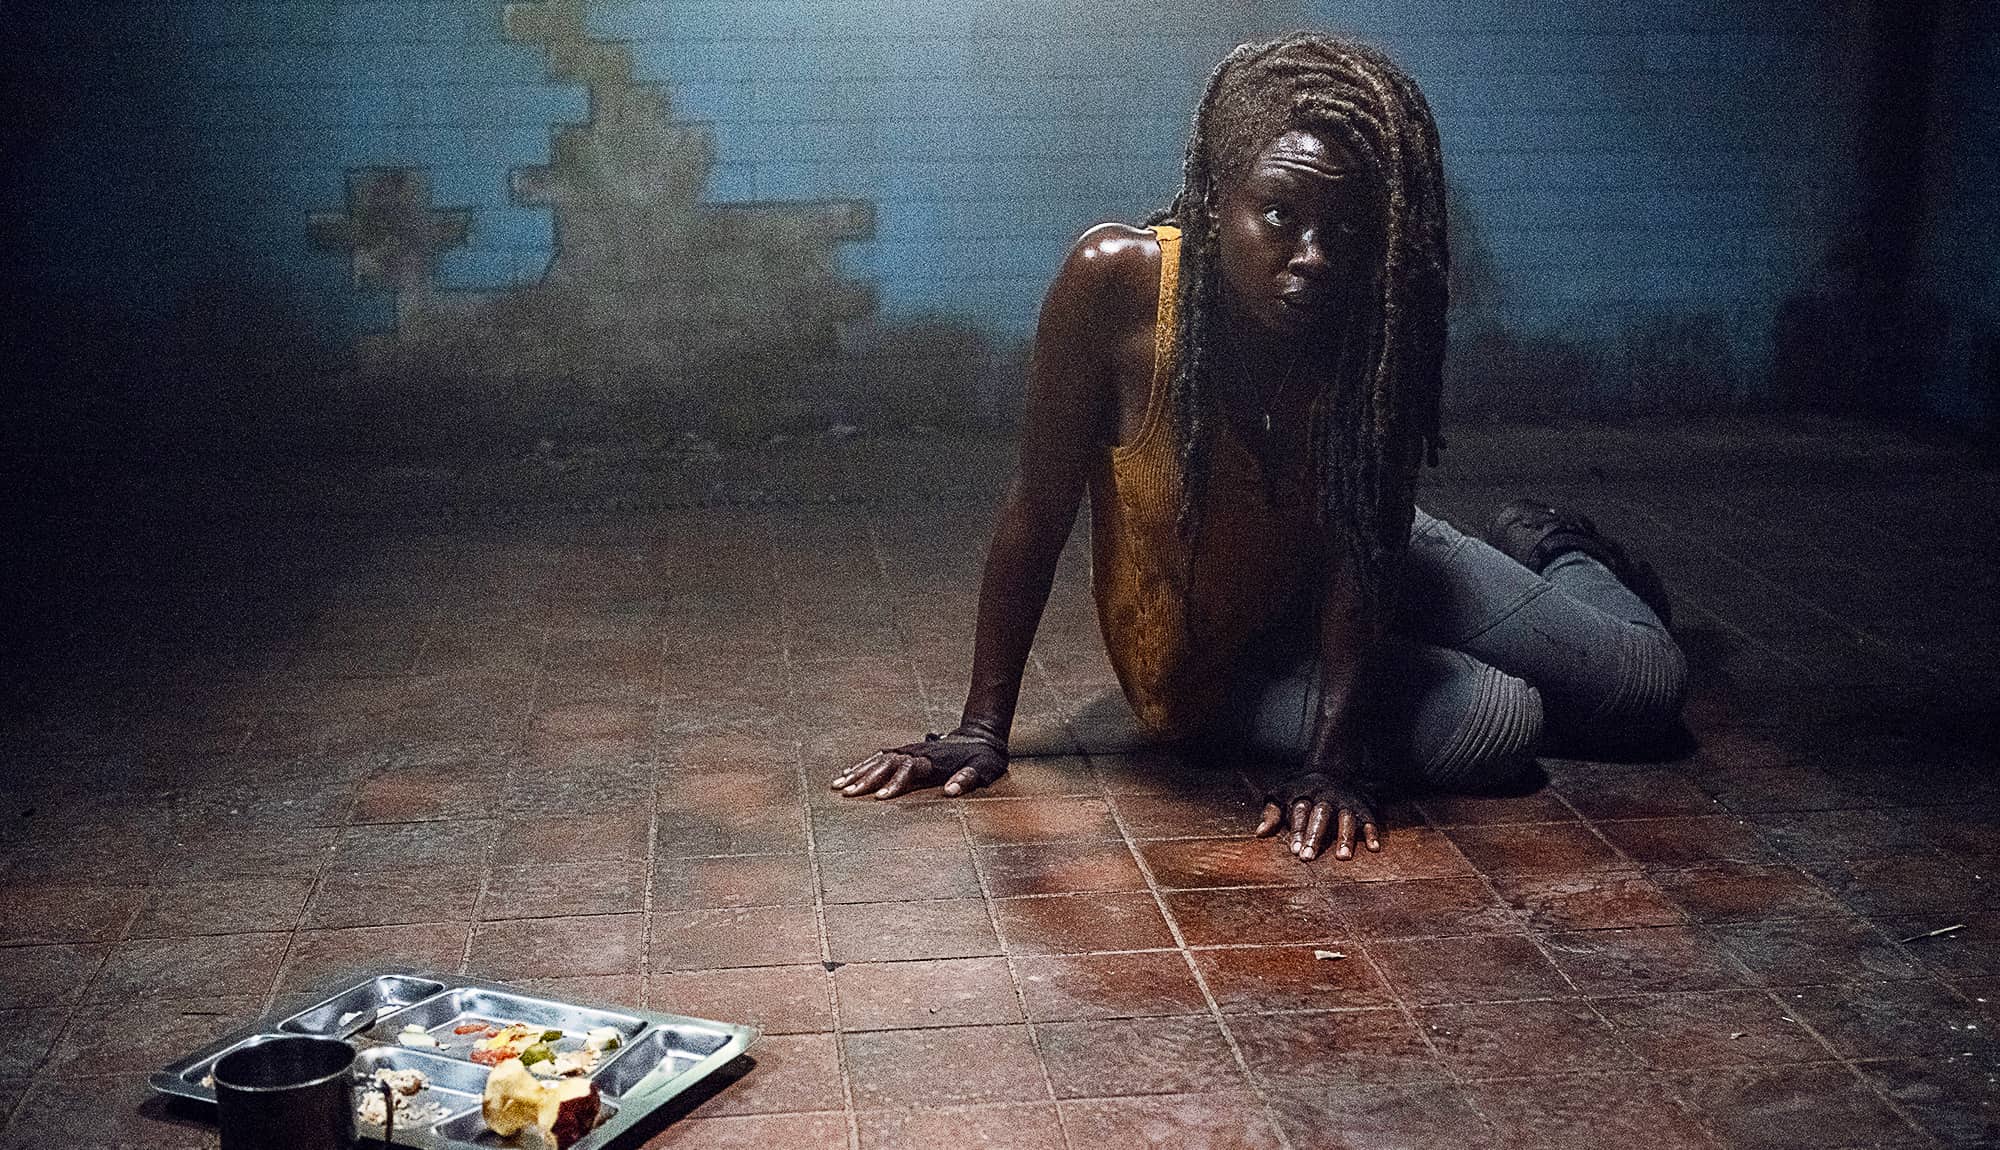 Michonne Gets Captured In New Images From The Walking Dead Episode 1013